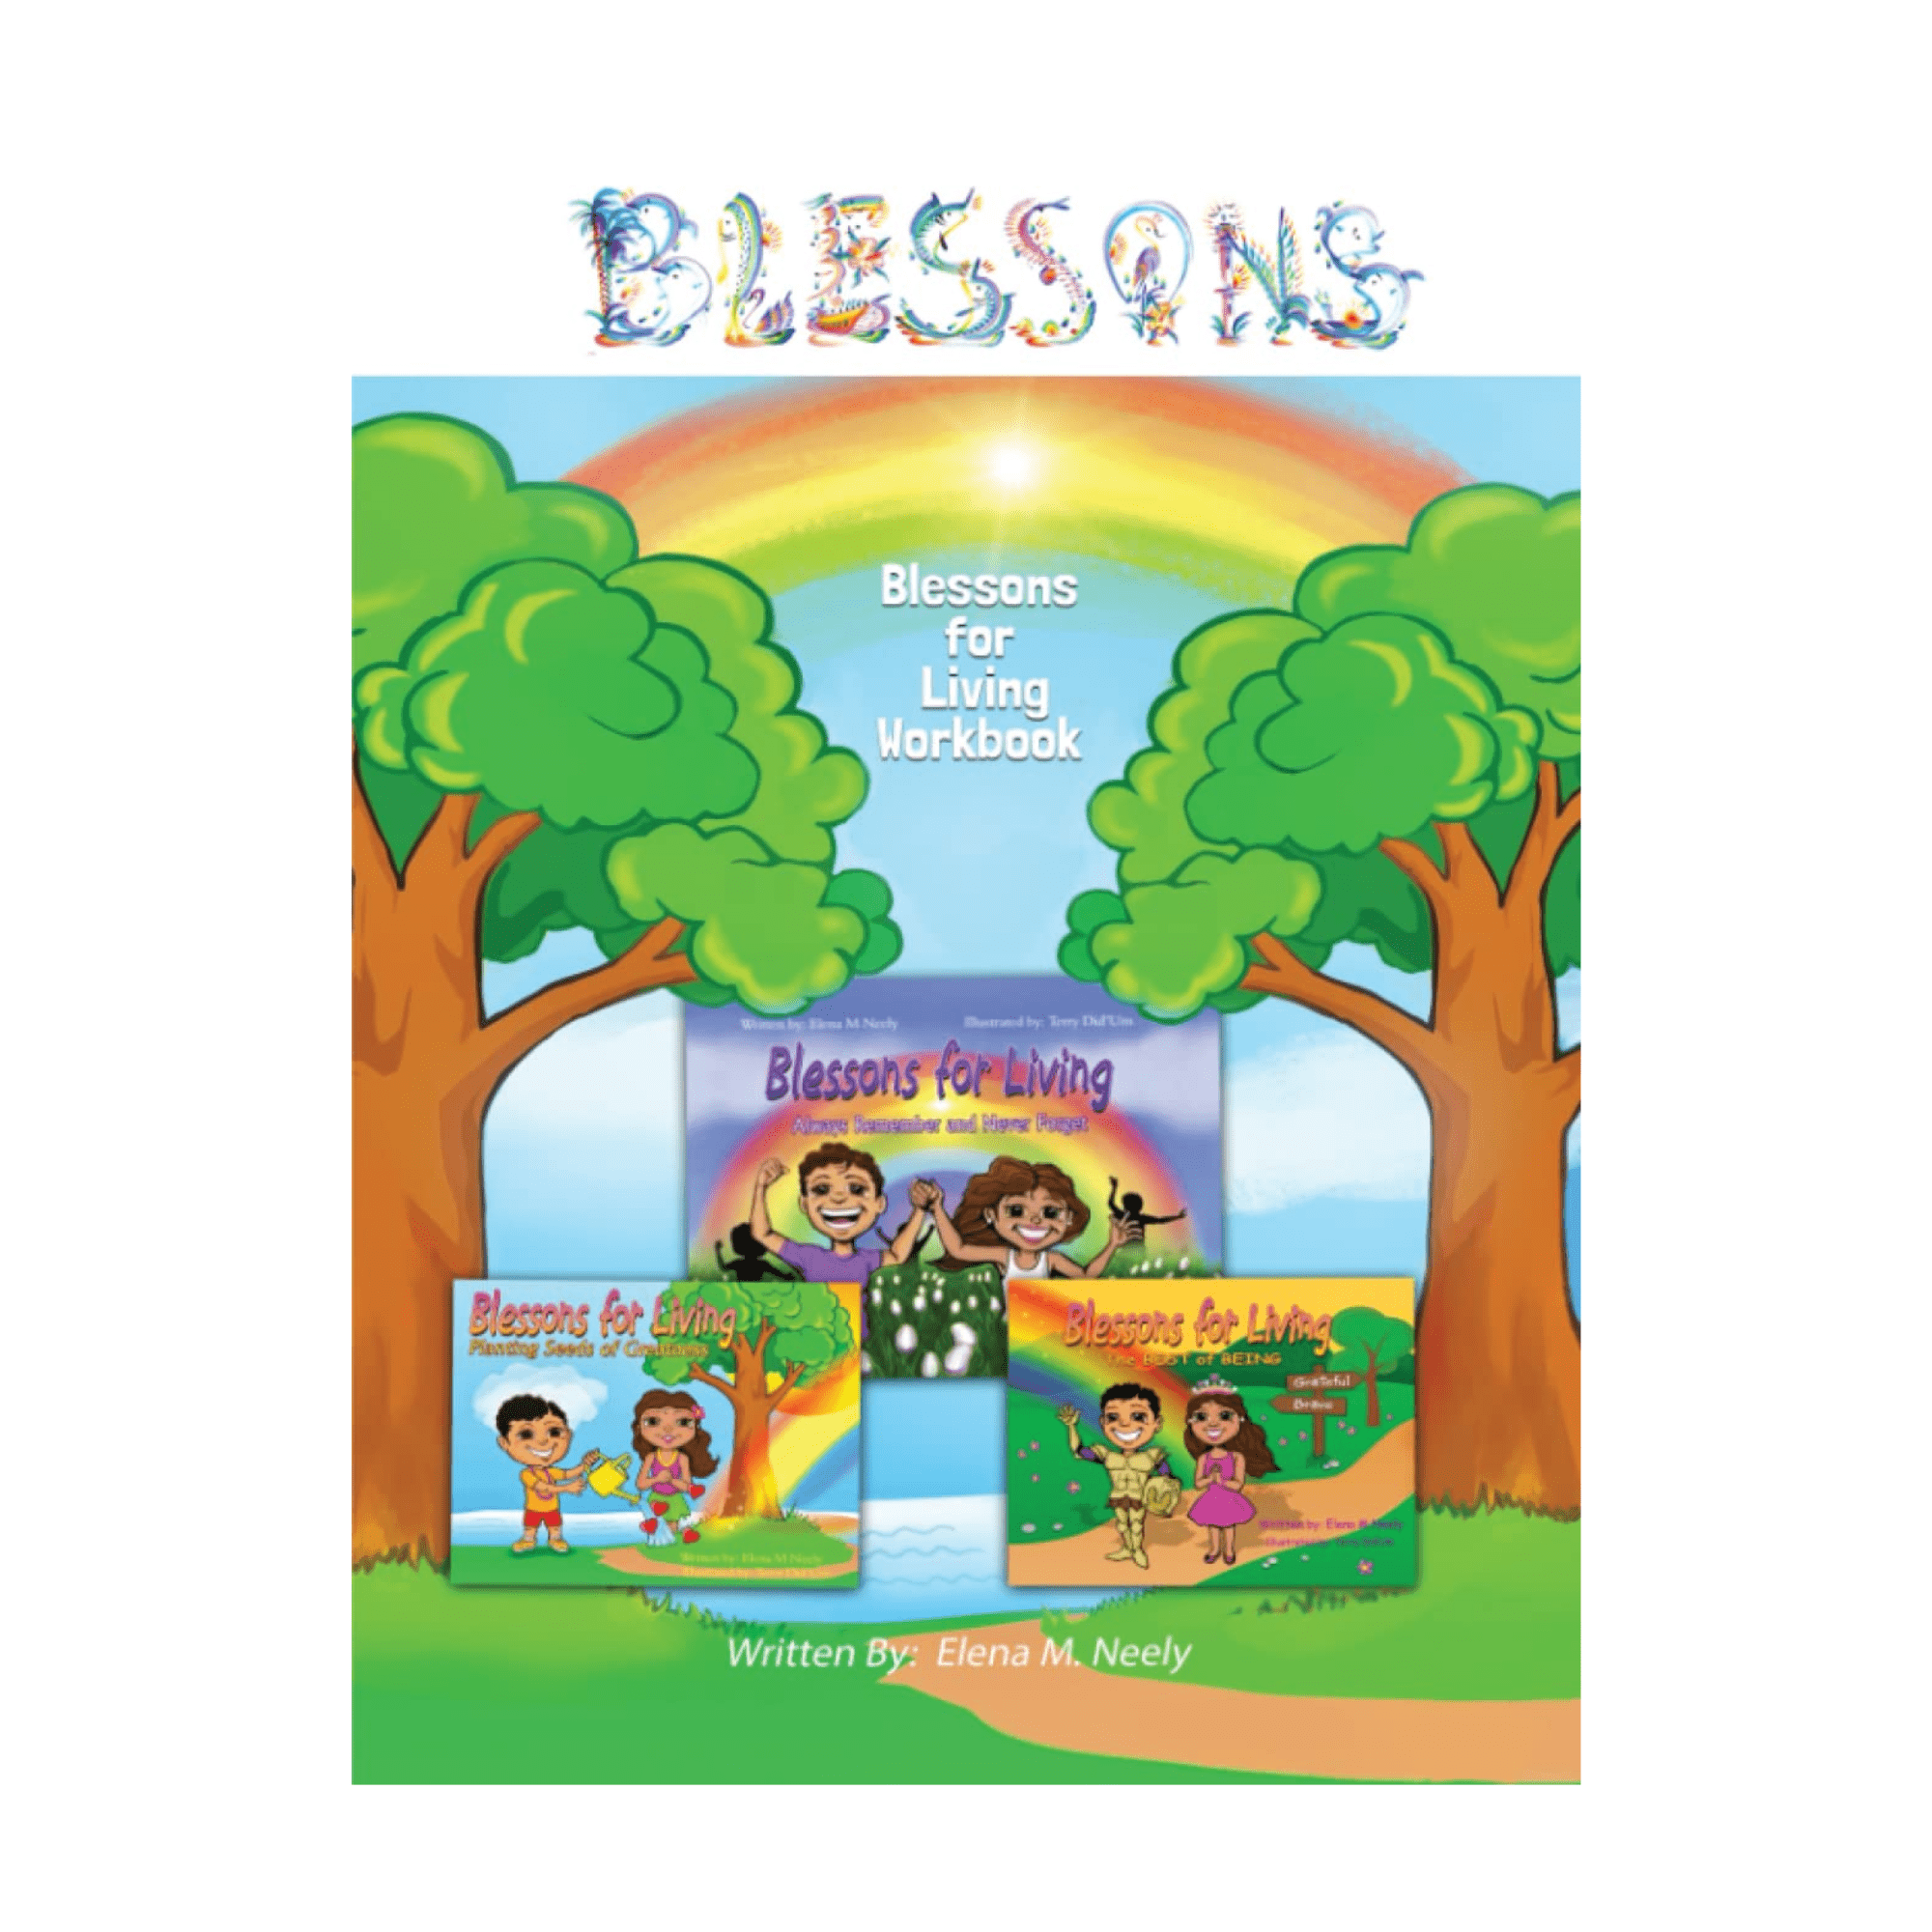 Blessons for Living Workbook